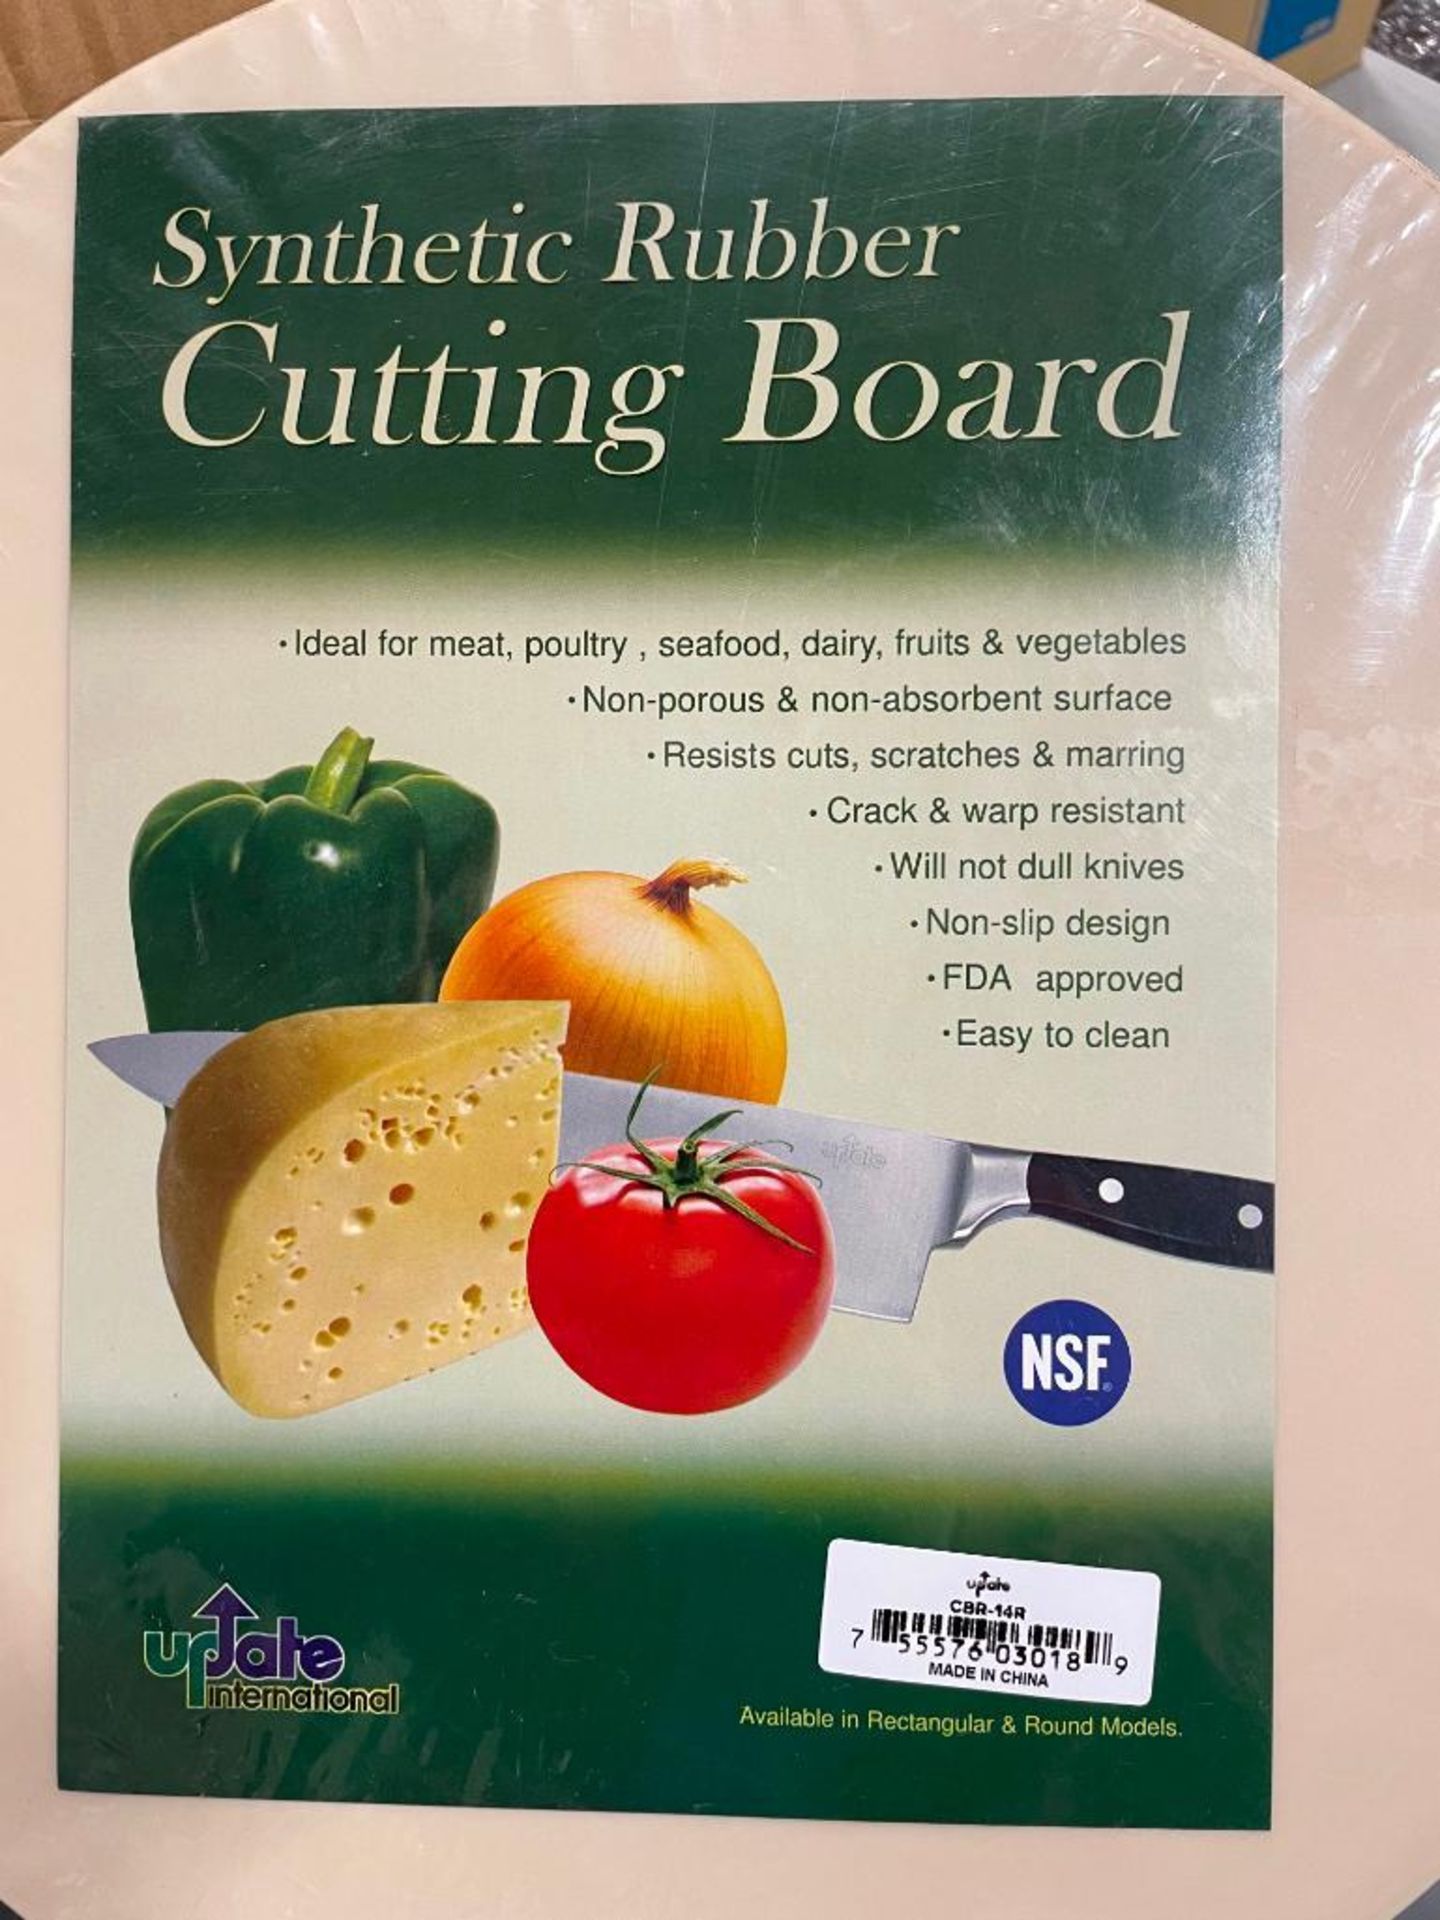 UPDATE CBR-14R ROUND CUTTING BOARD - 14 X 3/4" SYNTHETIC RUBBER - Image 3 of 3